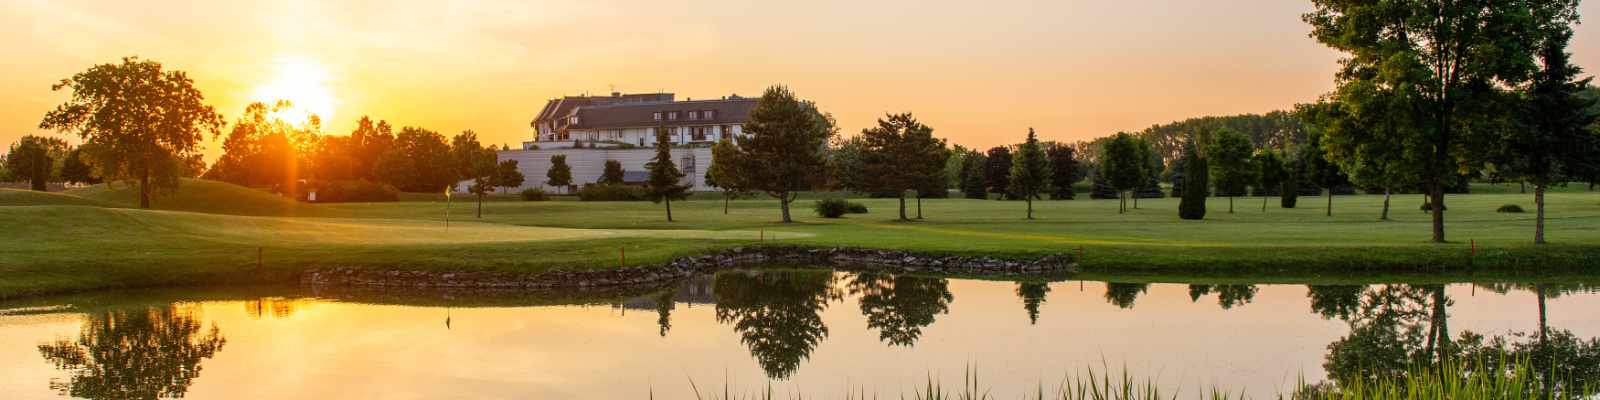 Greenfield Hotel Golf & Spa in Ungarn (photo by Greenfield Hotel Golf & Spa)